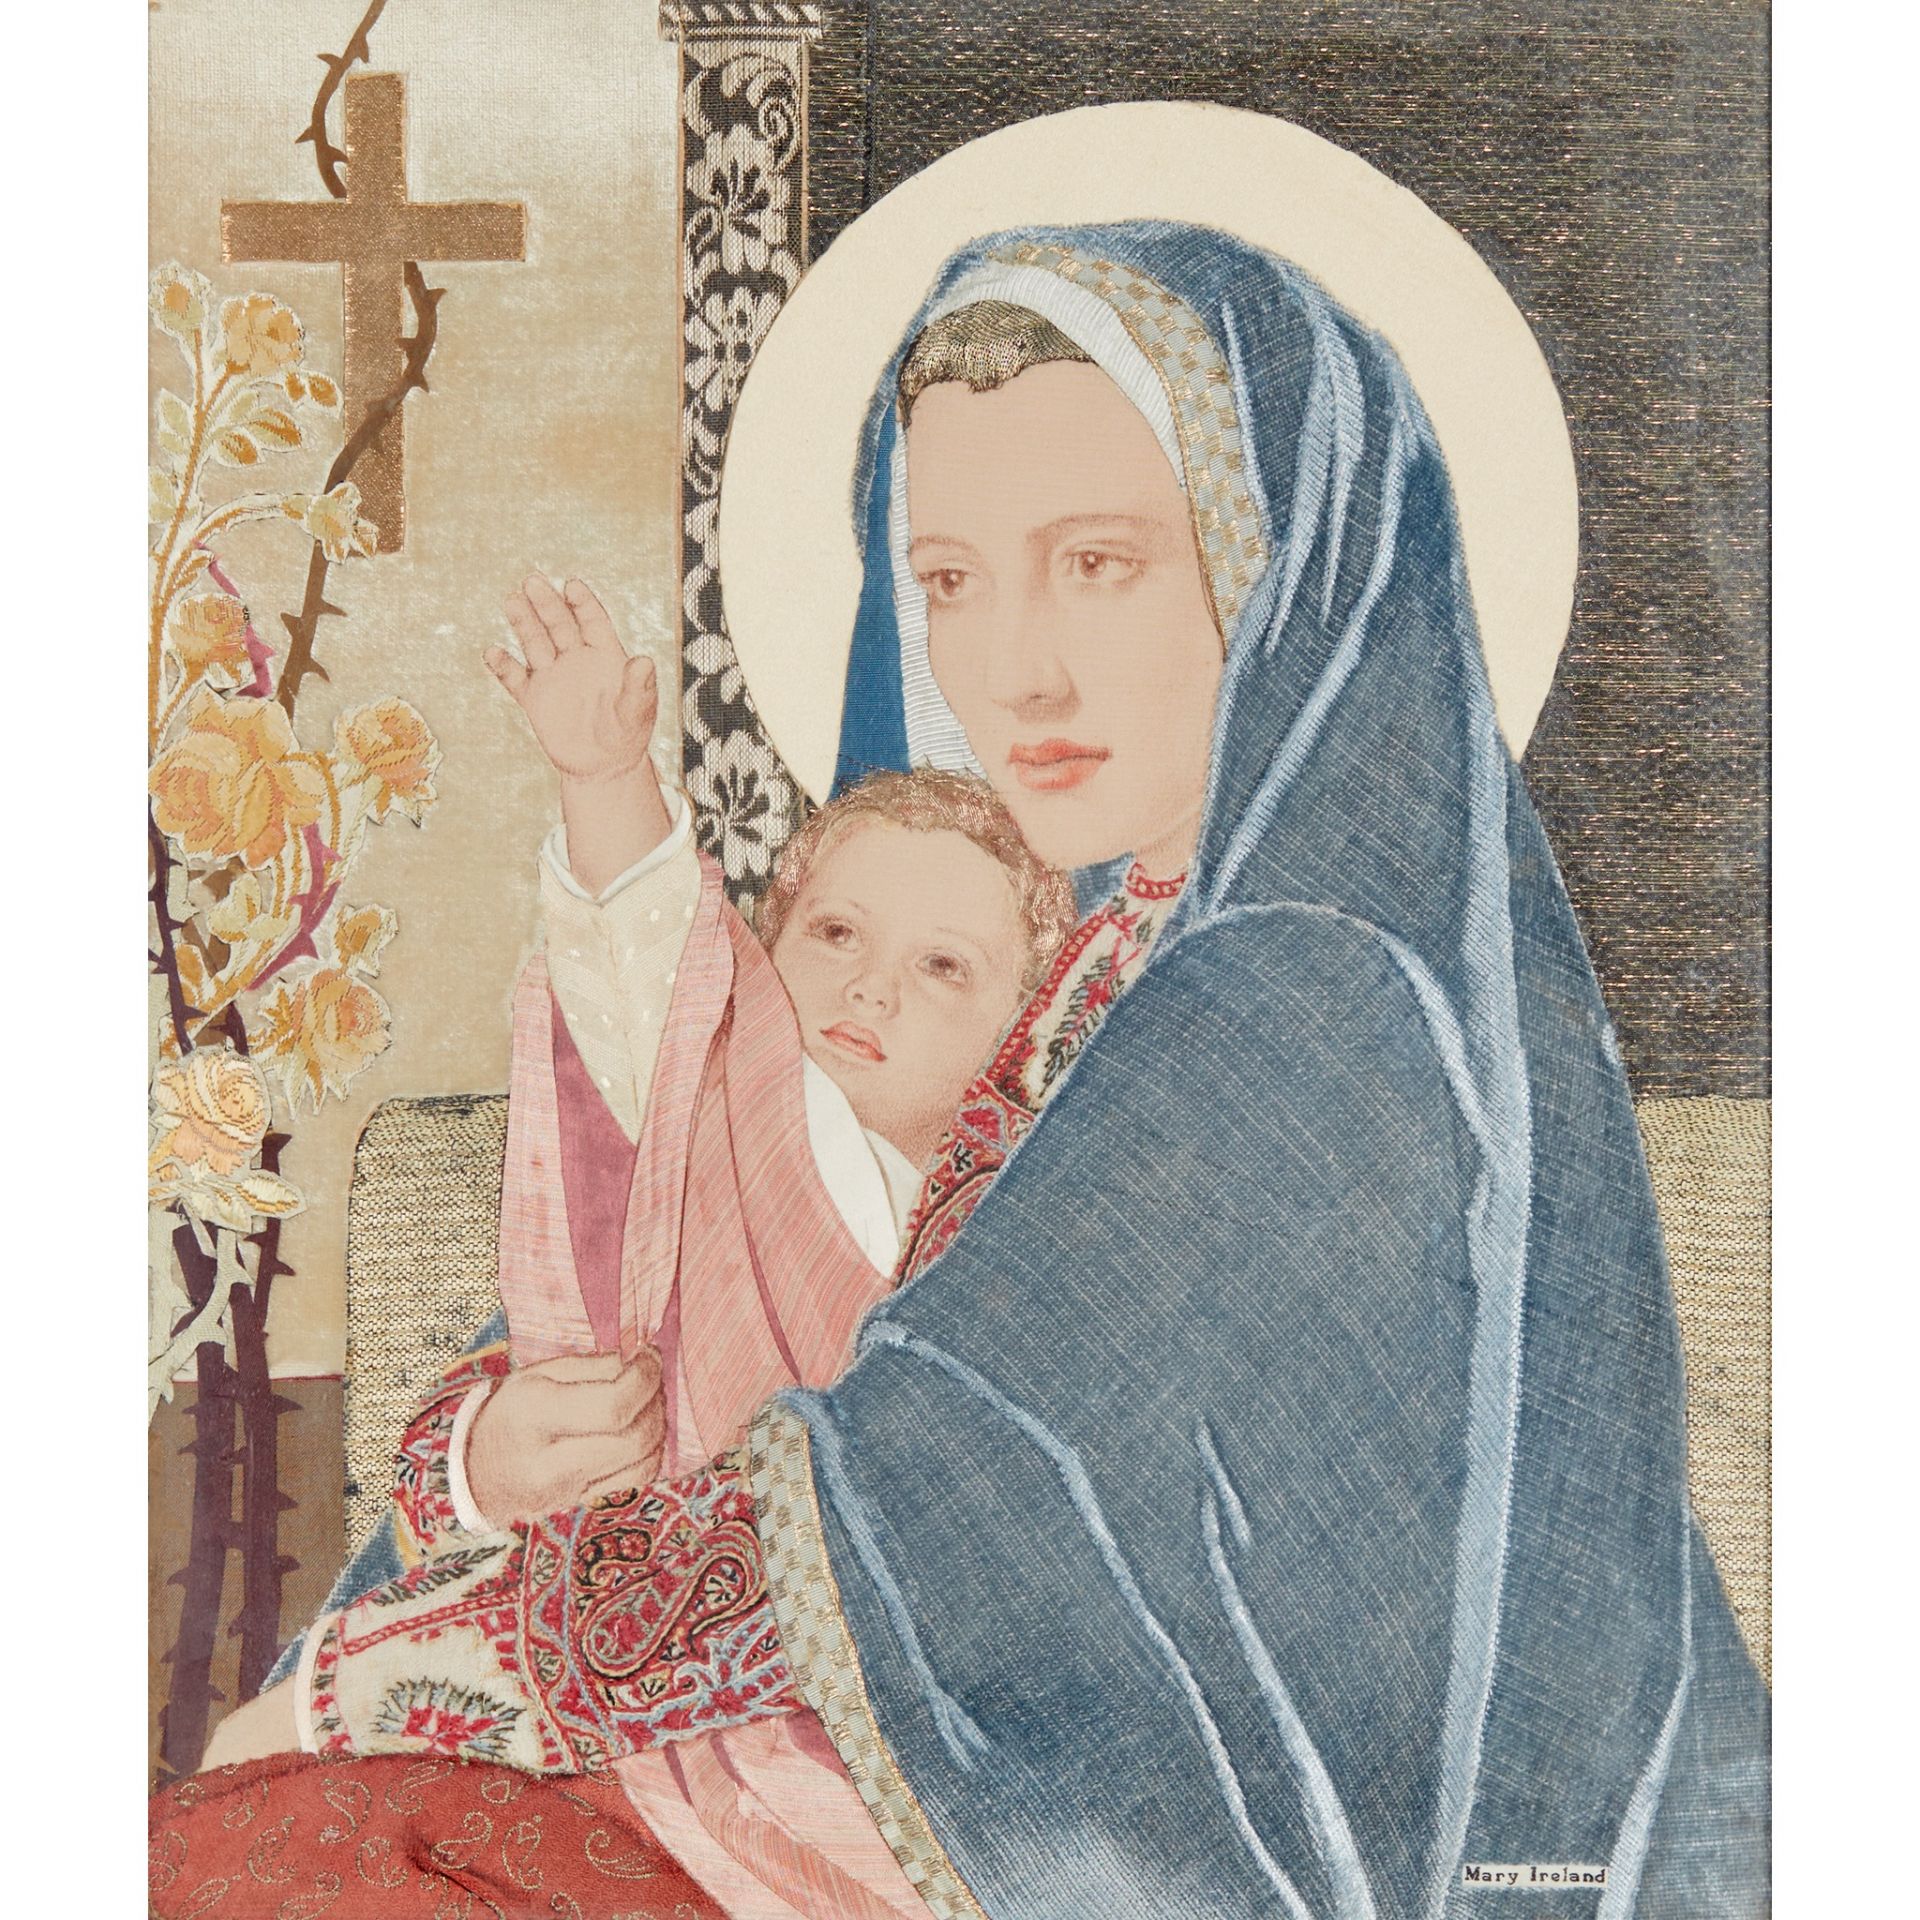 MARY IRELAND (1891-C.1980) ‘MADONNA & CHILD WITH ROSES AND THORNS’ DATED 1955